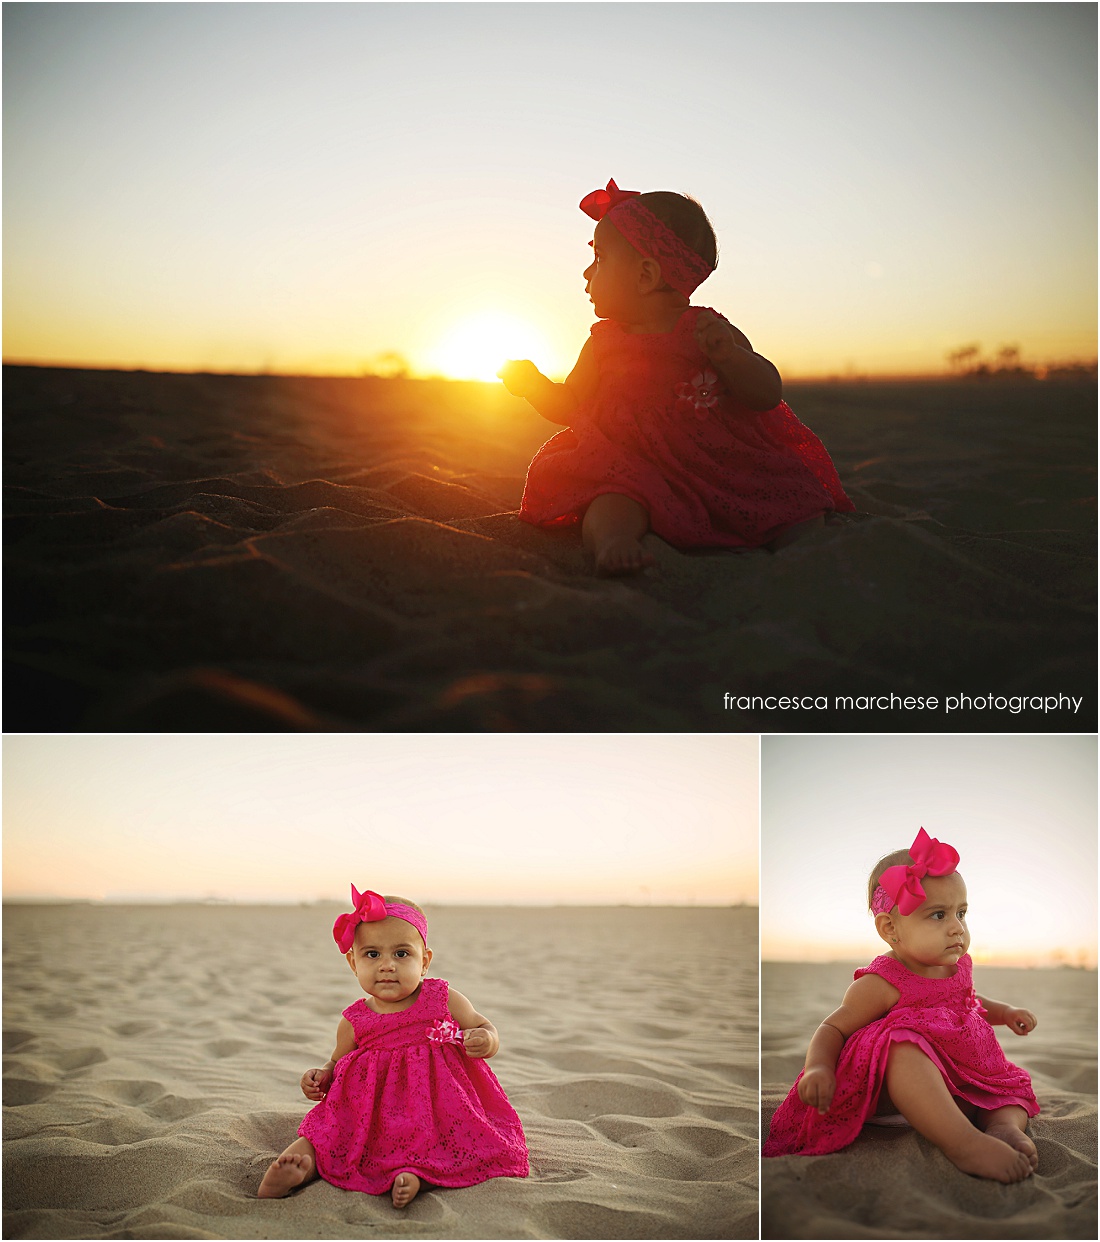 Francesca Marchese Photography - one year old at the beach